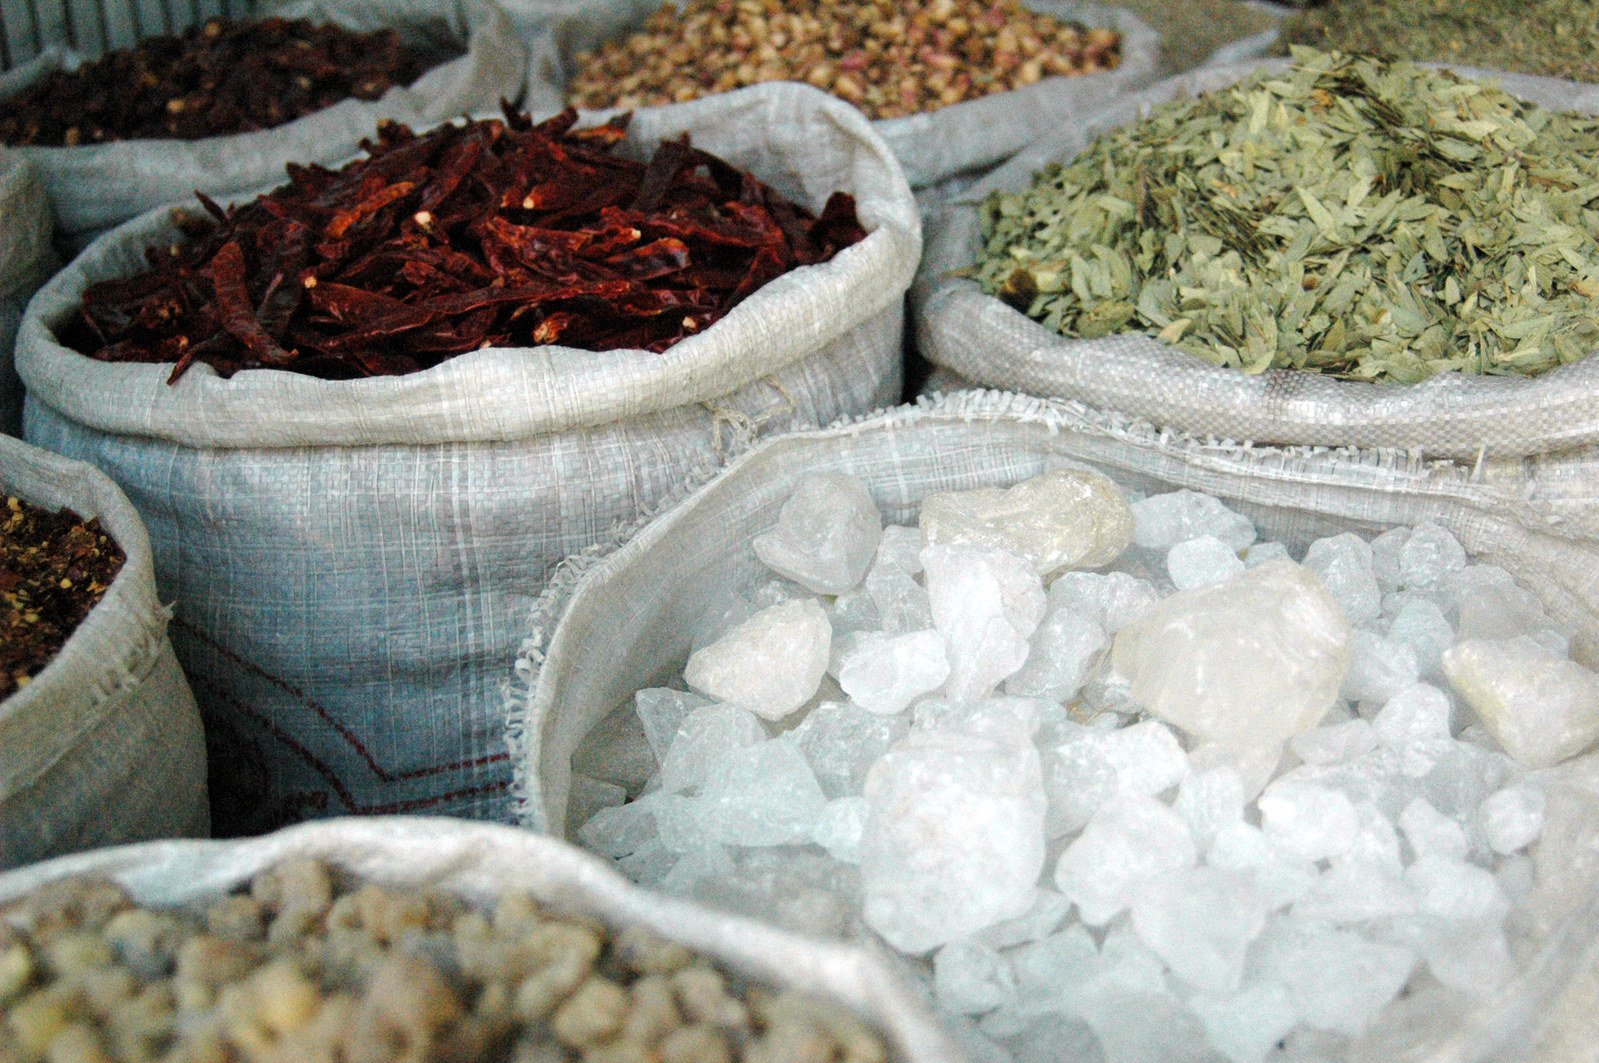 several bags filled with different types of spices and herbs